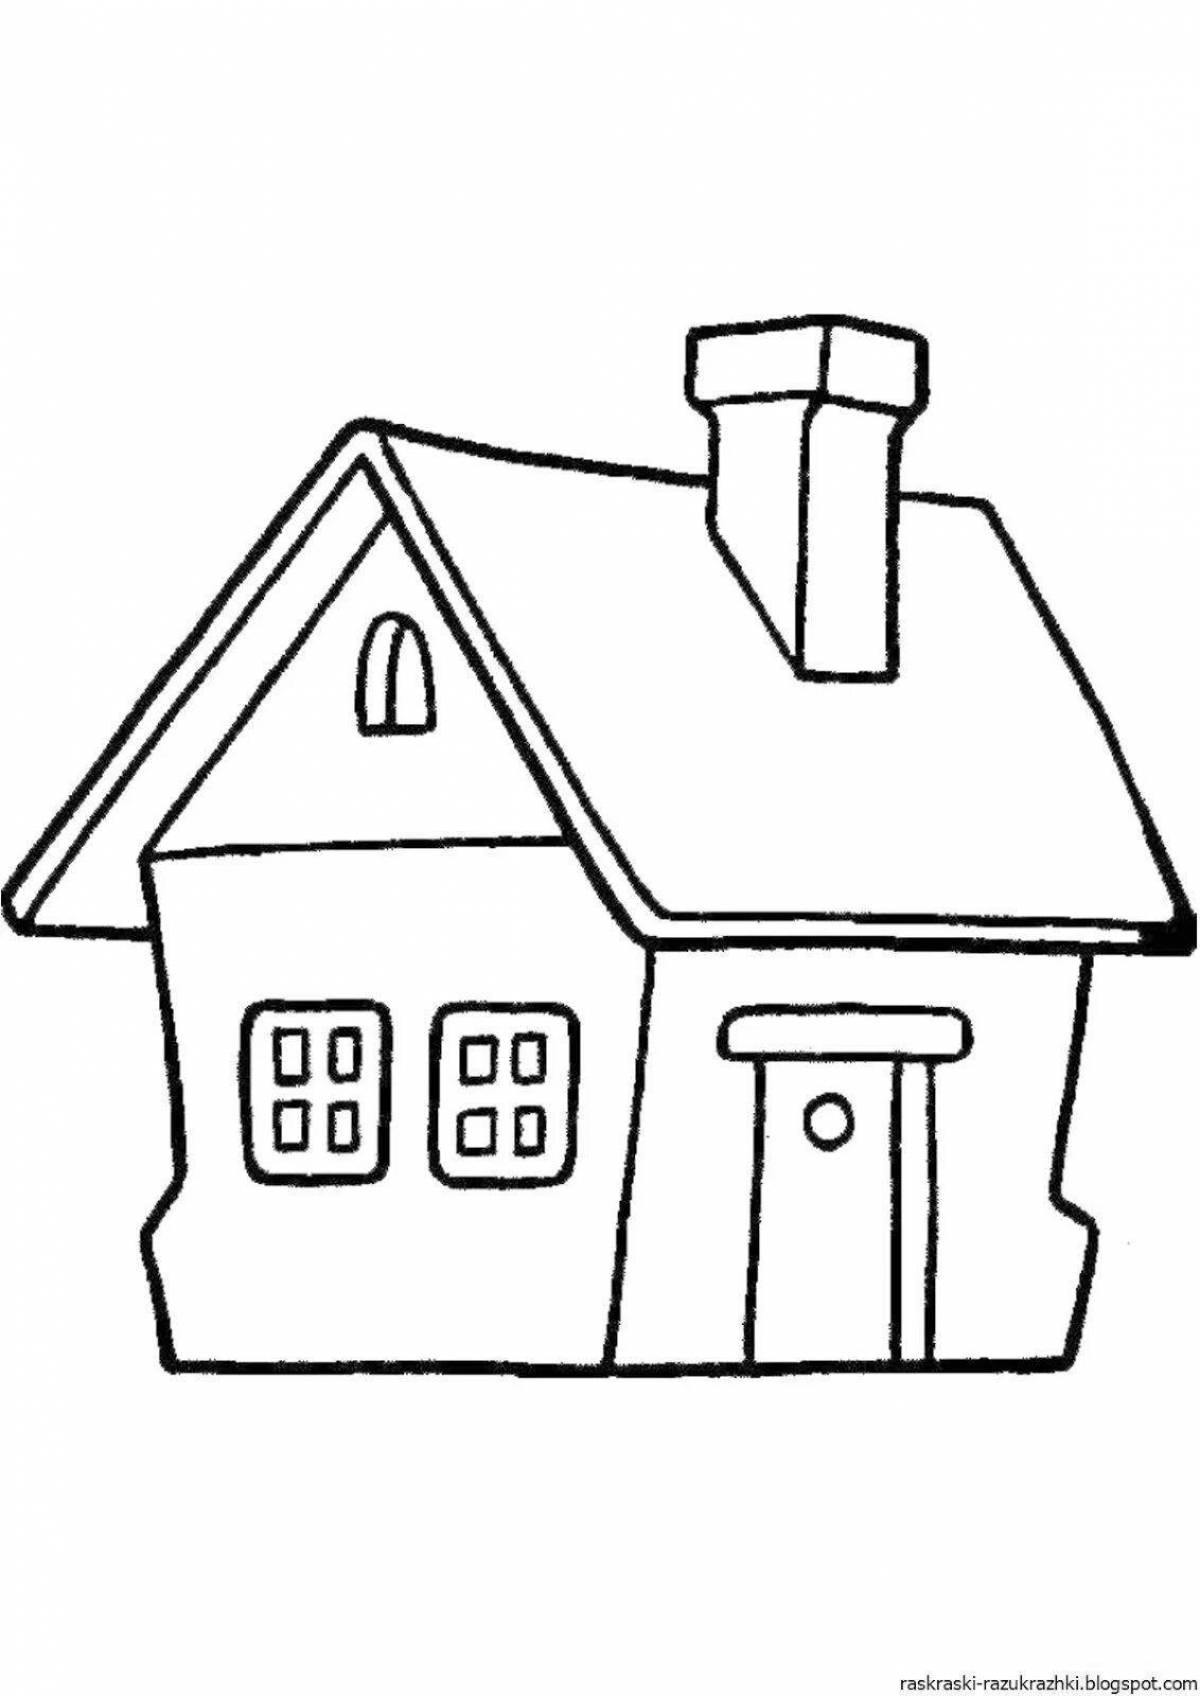 Dramatic drawing of a house